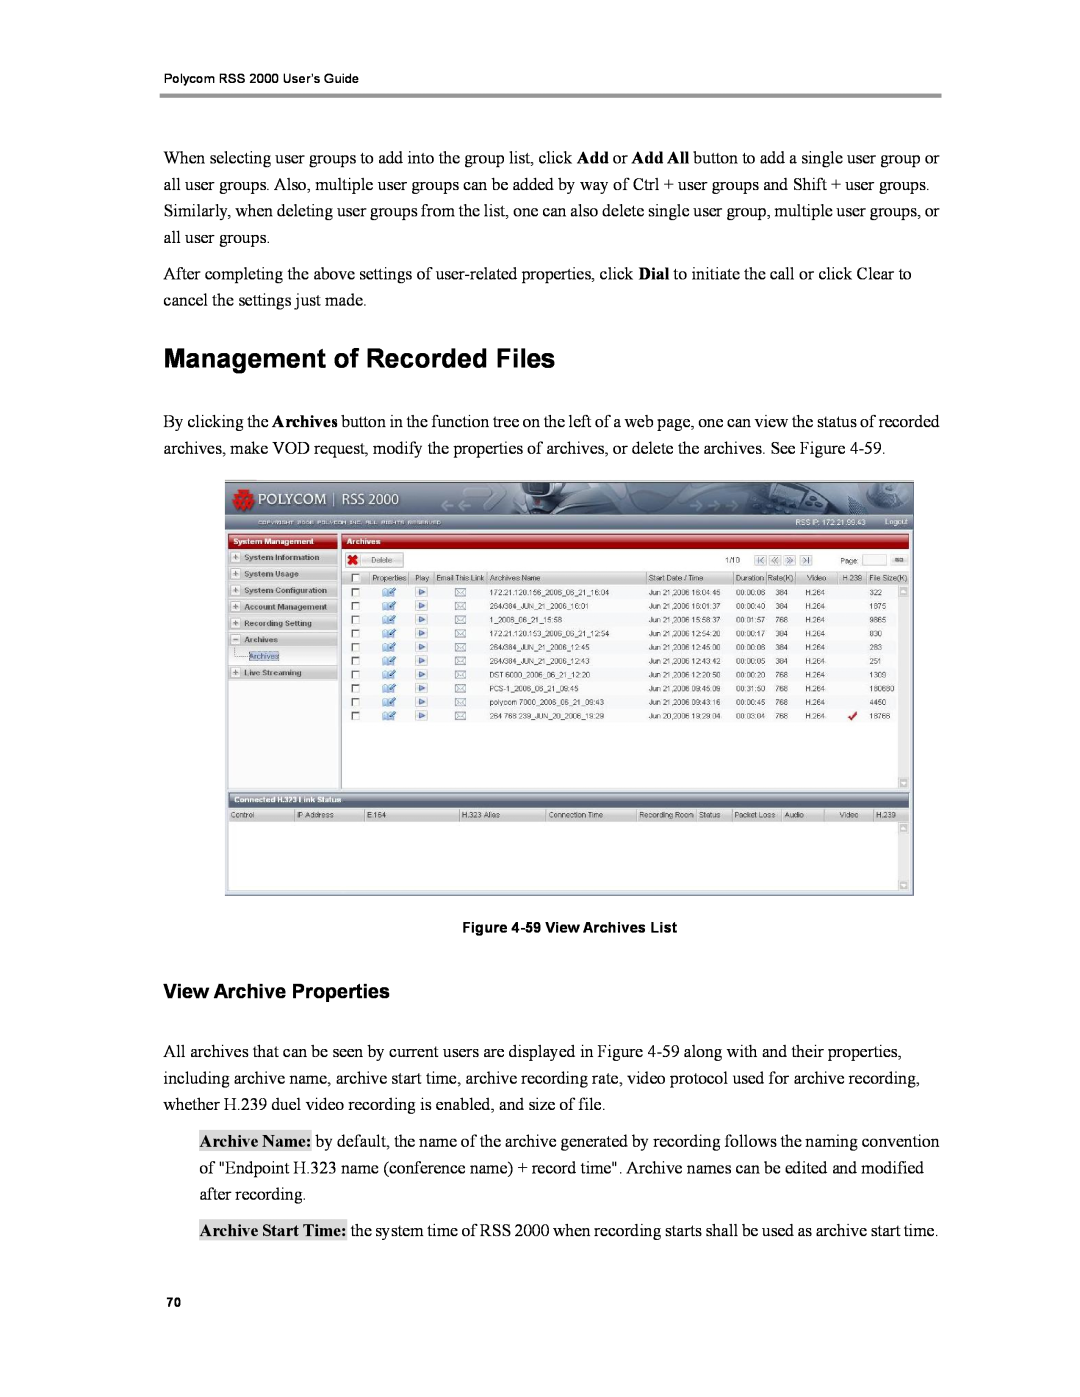 Polycom RSS 2000 manual Management of Recorded Files, View Archive Properties 